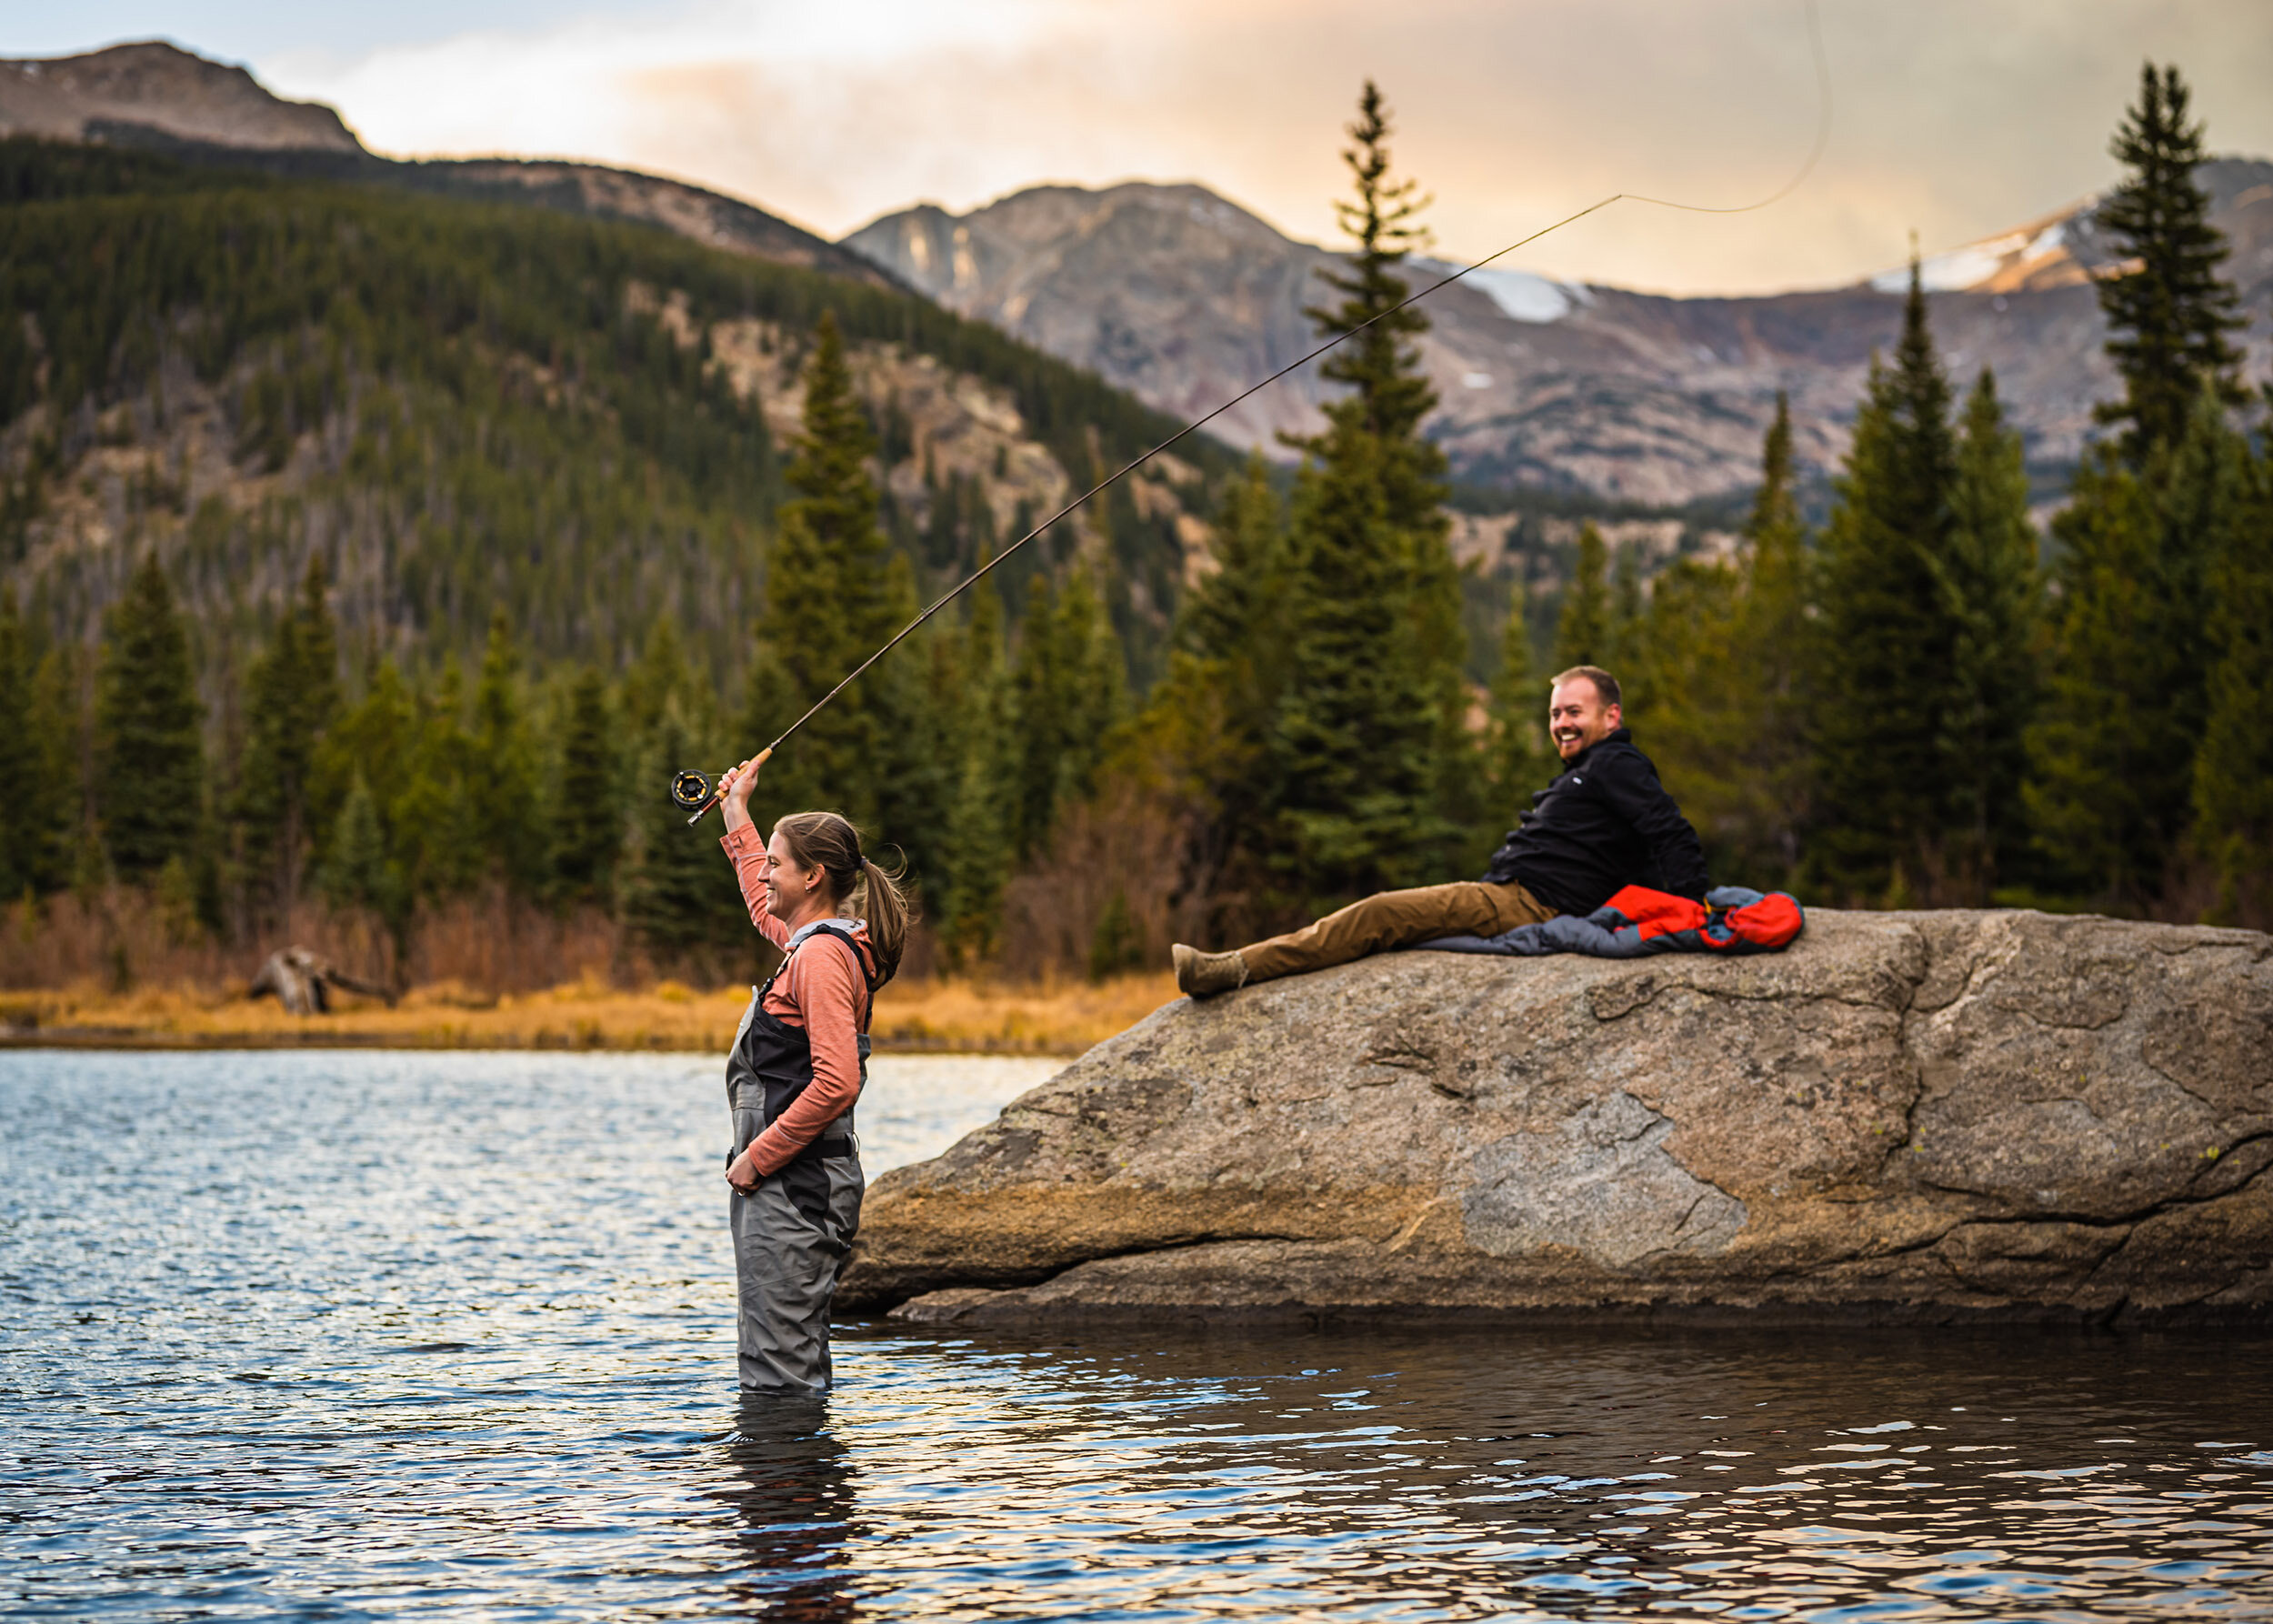 lost-lake-colorado-engagement-photographer-adventure-camping-hiking-fly-fishing (9).jpg